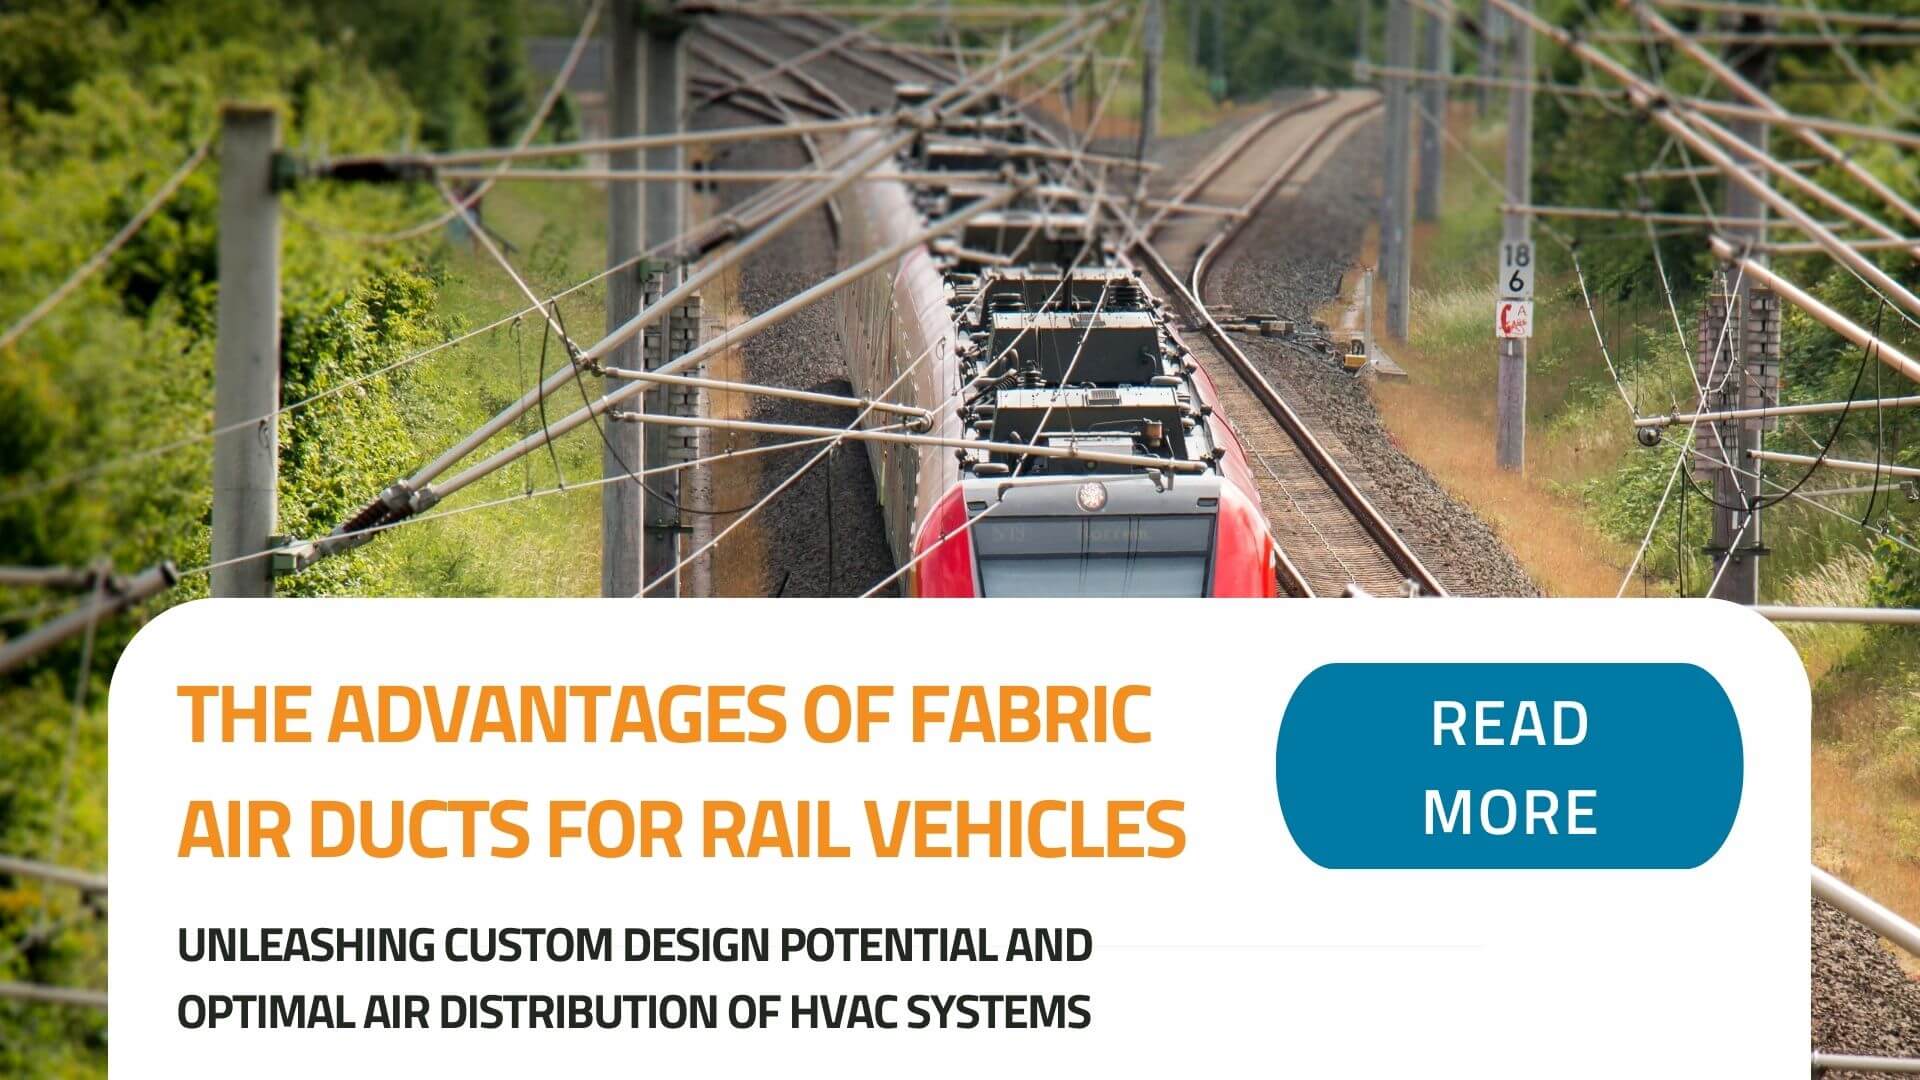 The Advantages of Fabric Air Ducts for Rail Vehicles: Unleashing Custom Design Potential and Optimal Air Distribution